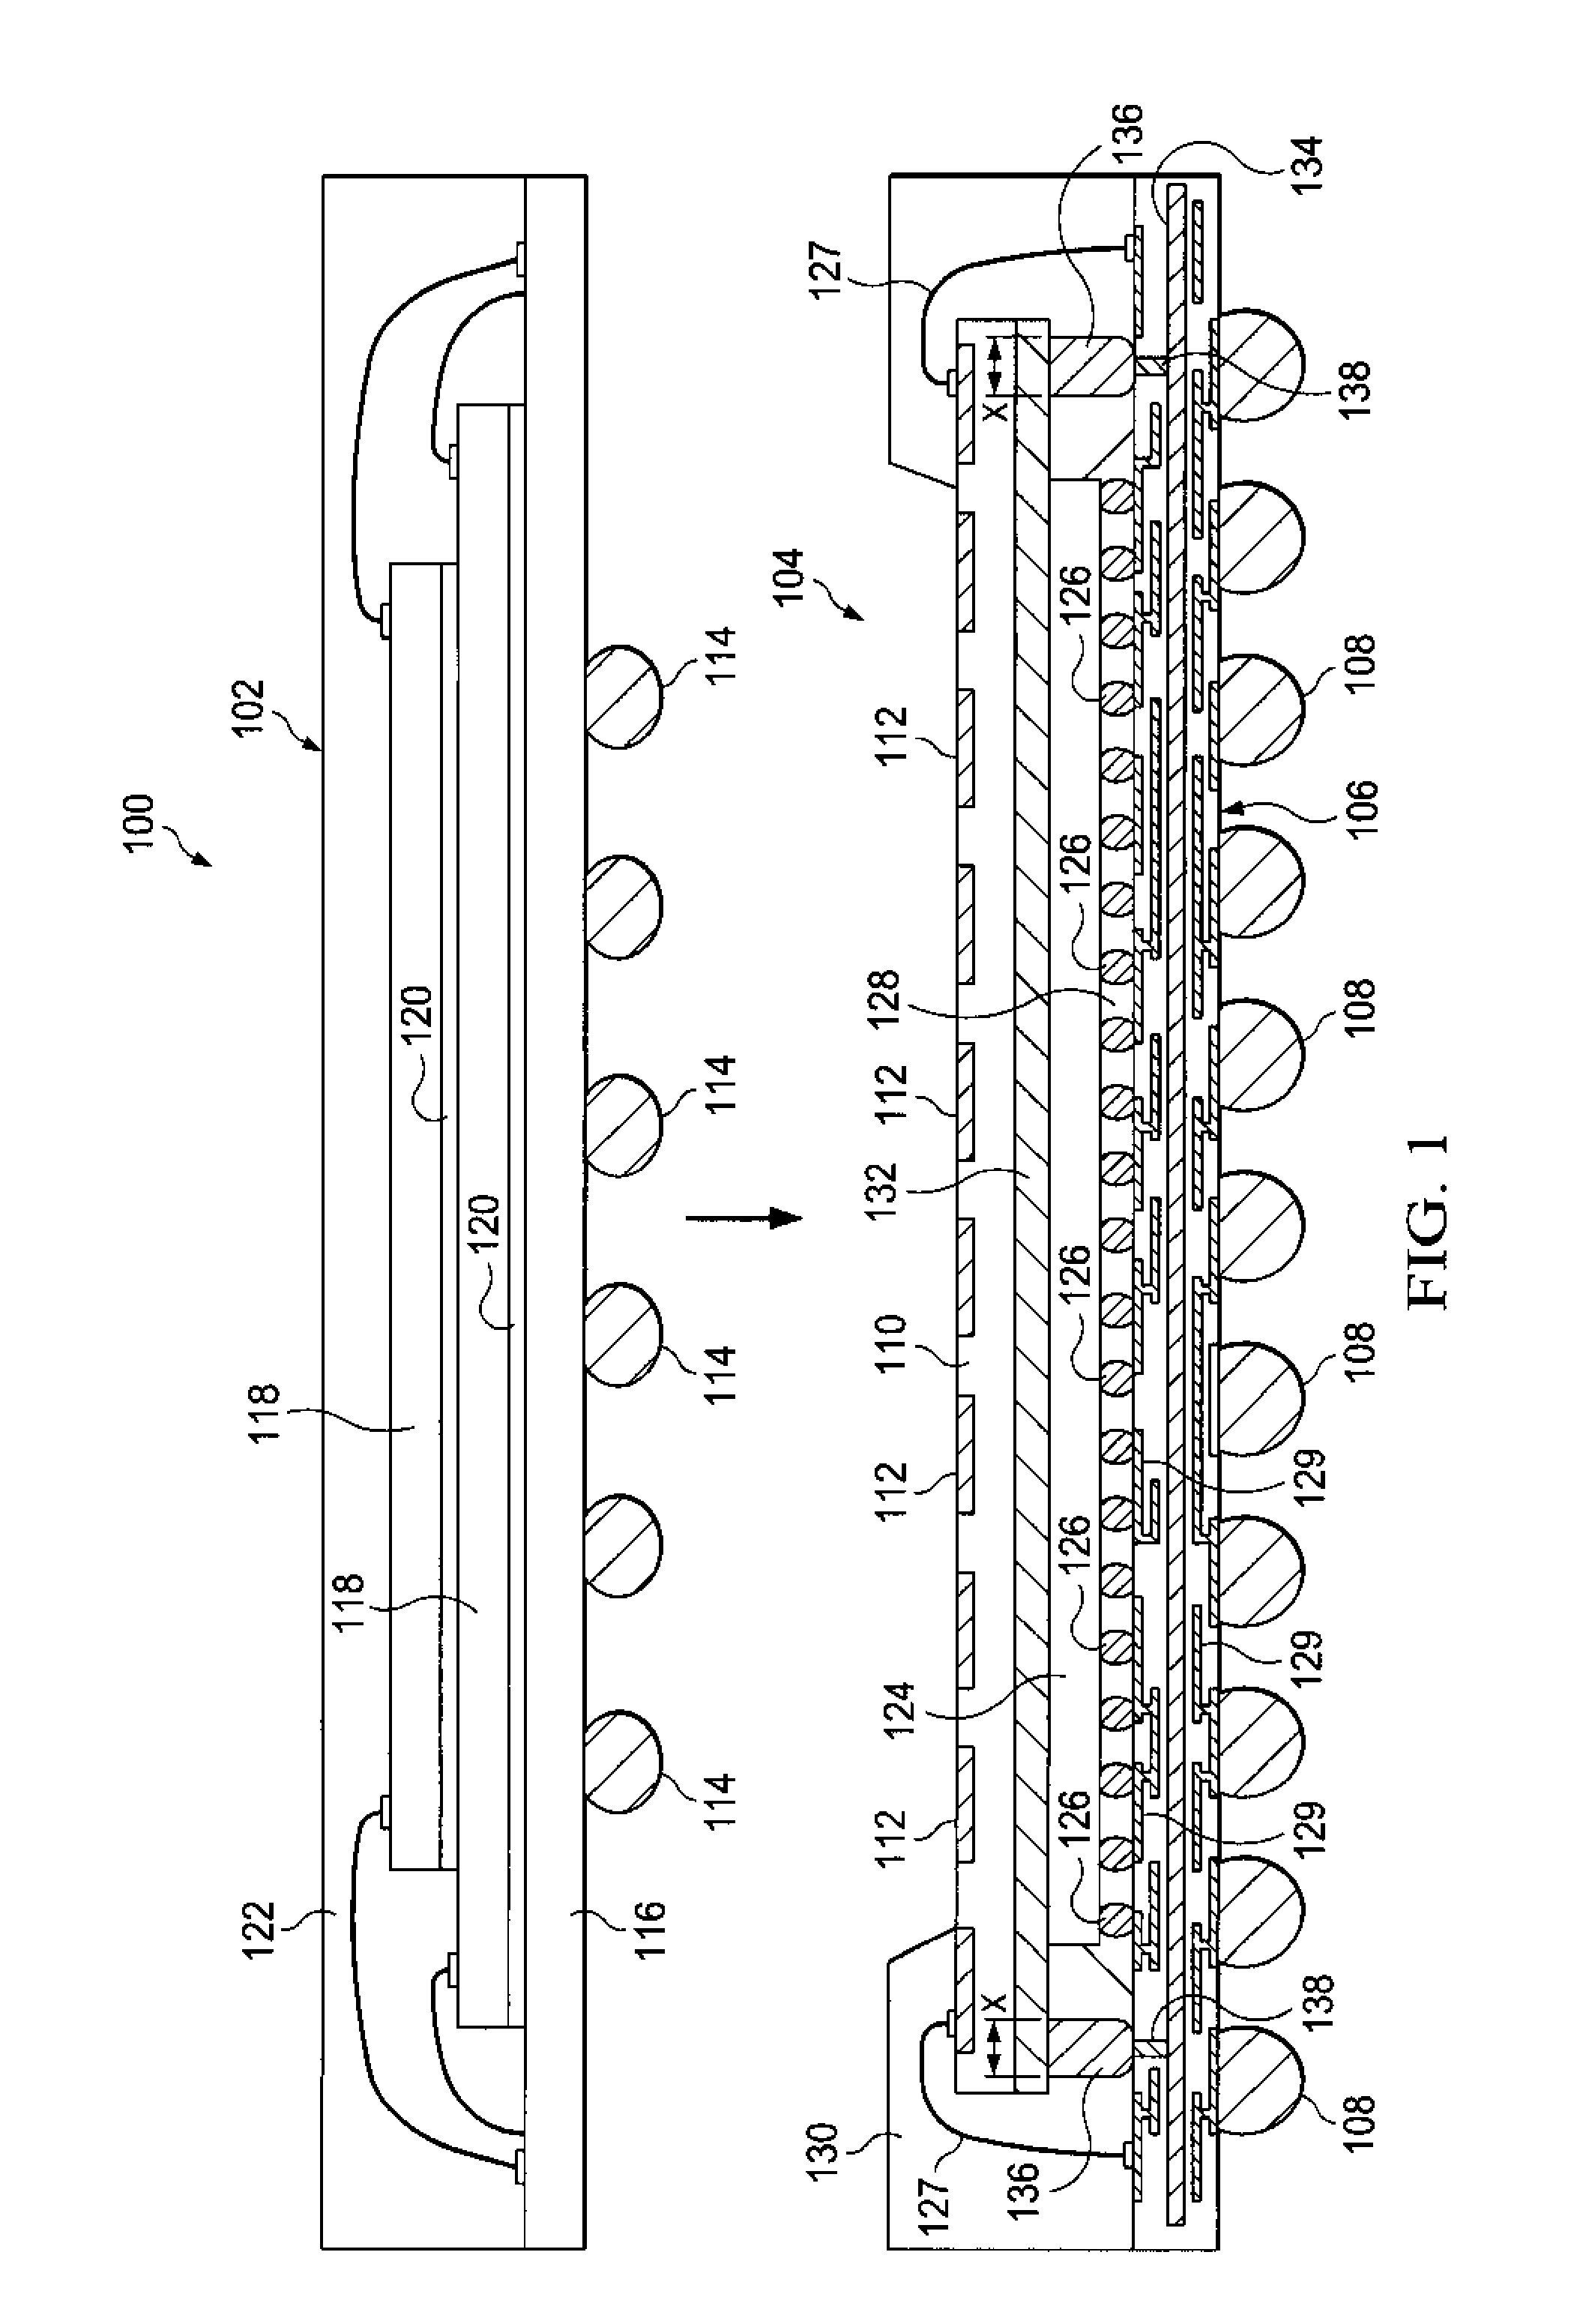 Integrated circuit package having integrated faraday shield